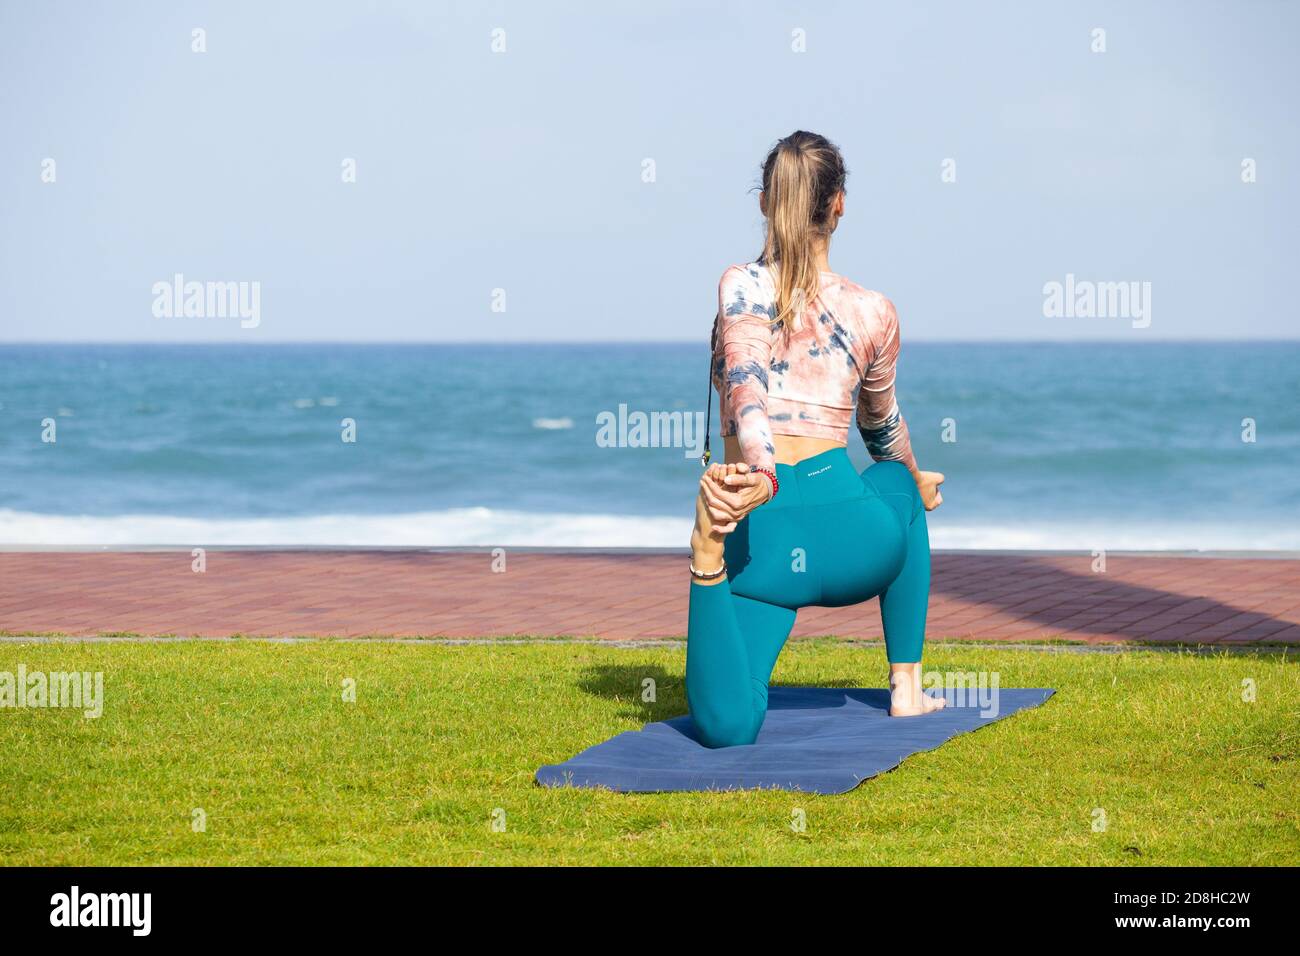 Las Palmas, Gran Canaria, Canary Islands, Spain. 30th October 2020. Yoga session overlooking the city beach in Las Palmas on Gran Canaria. Brits returning from The Canary Islands will no longer have to self isolate. The Canary Islands are the only region of Spain exempt from the new state of emergency measures announced by the Spanish government on Sunday. 25th, October. Credit: Alan Dawson/Alamy Live News. Stock Photo